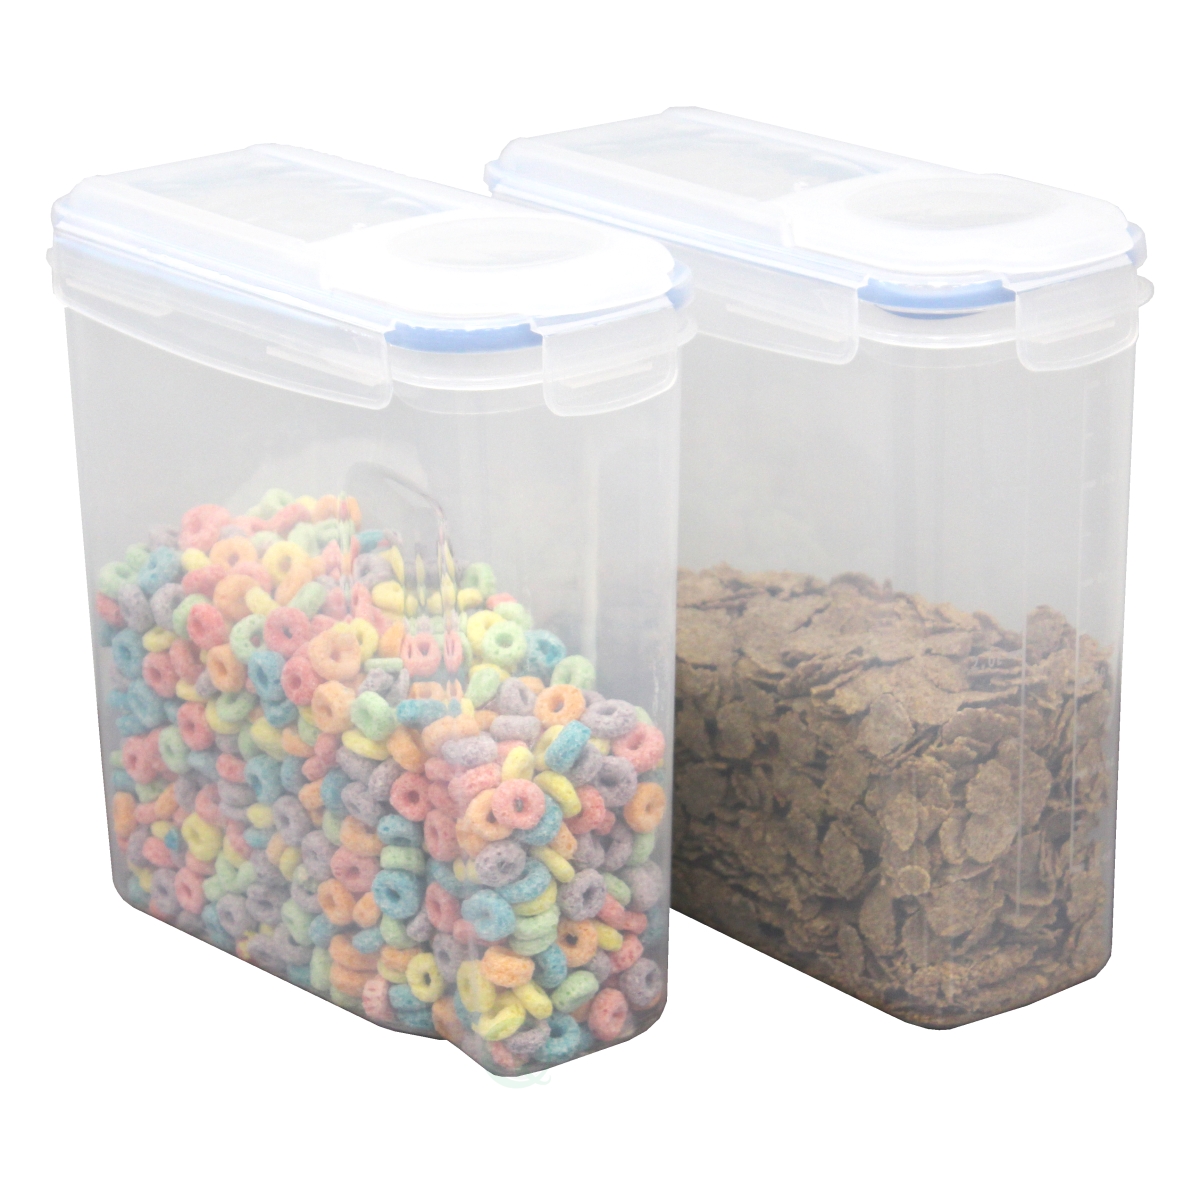 Picture of Basicwise QI003322.2 BPA-Free Plastic Food Cereal Containers with Airtight Spout Lid, Clear - Large - Set of 2